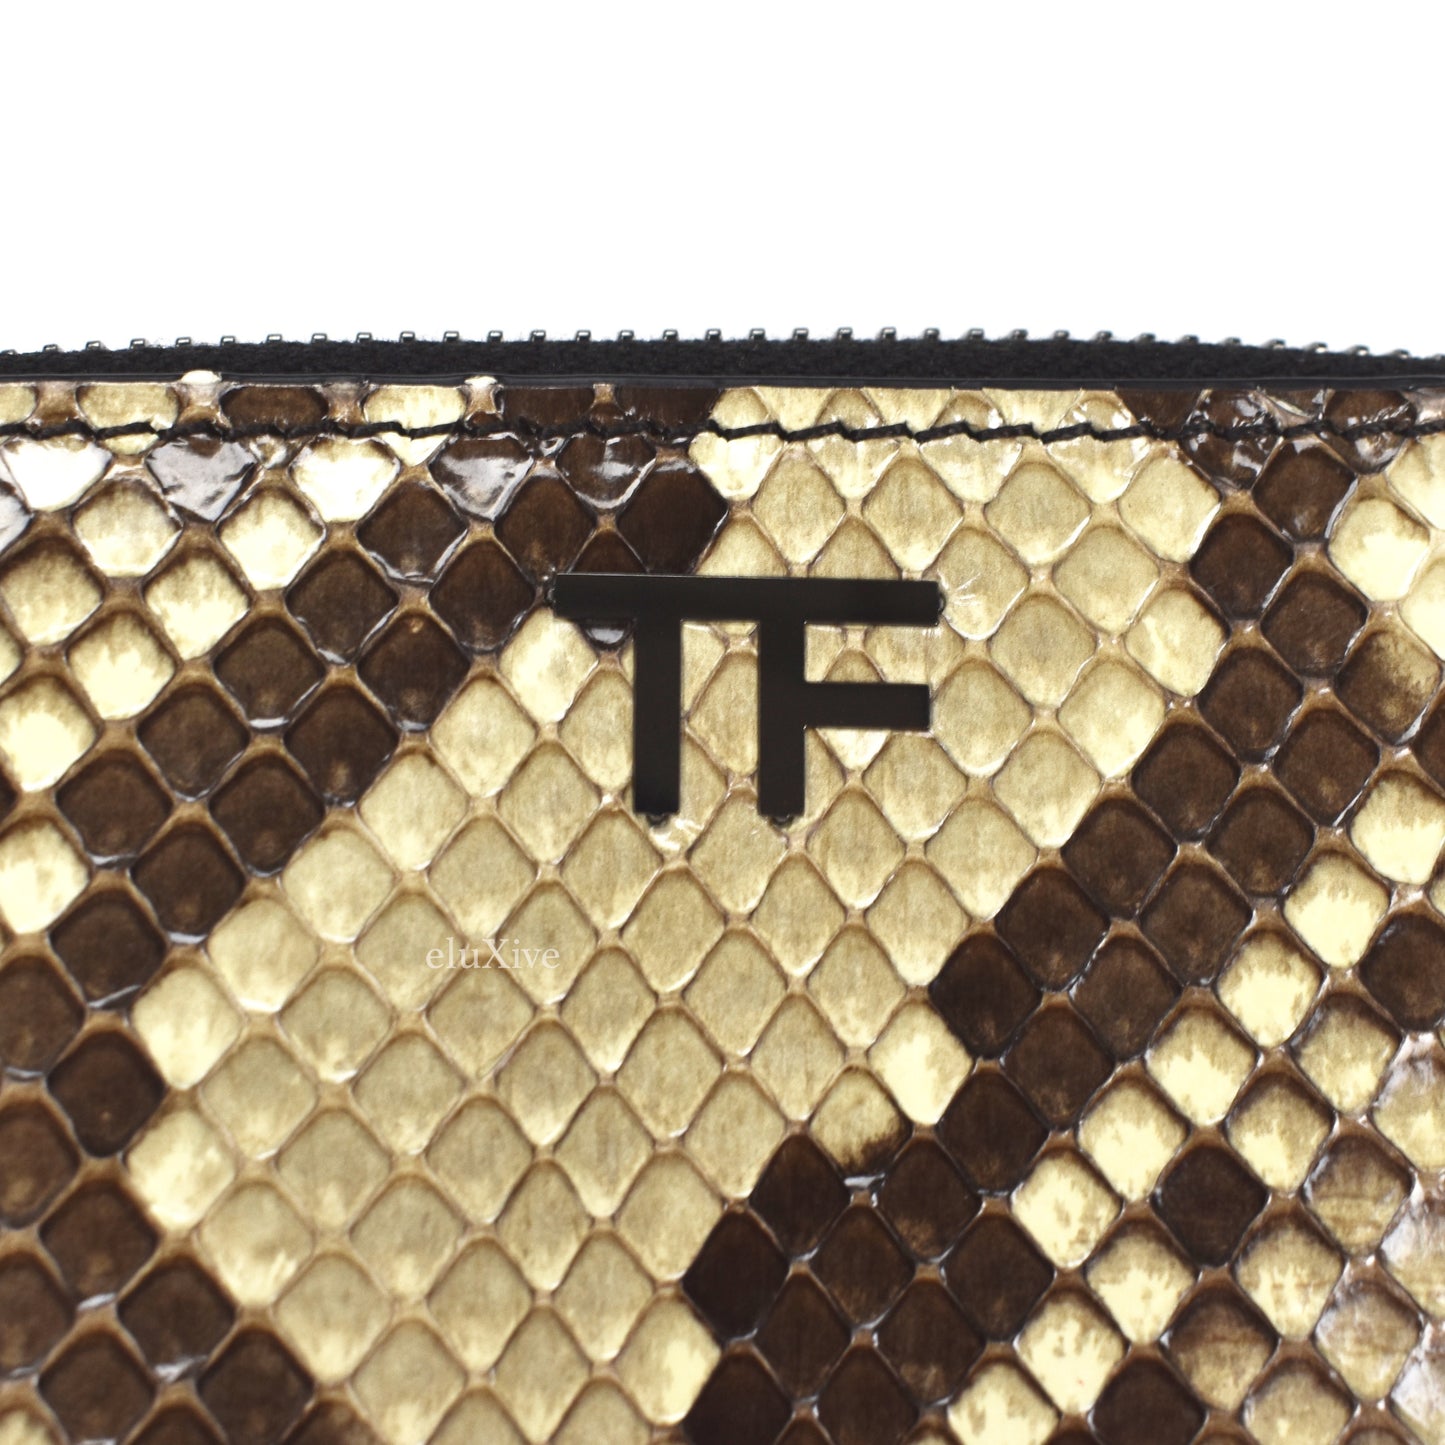 Tom Ford - Beige Exotic Python Small Zip Wallet